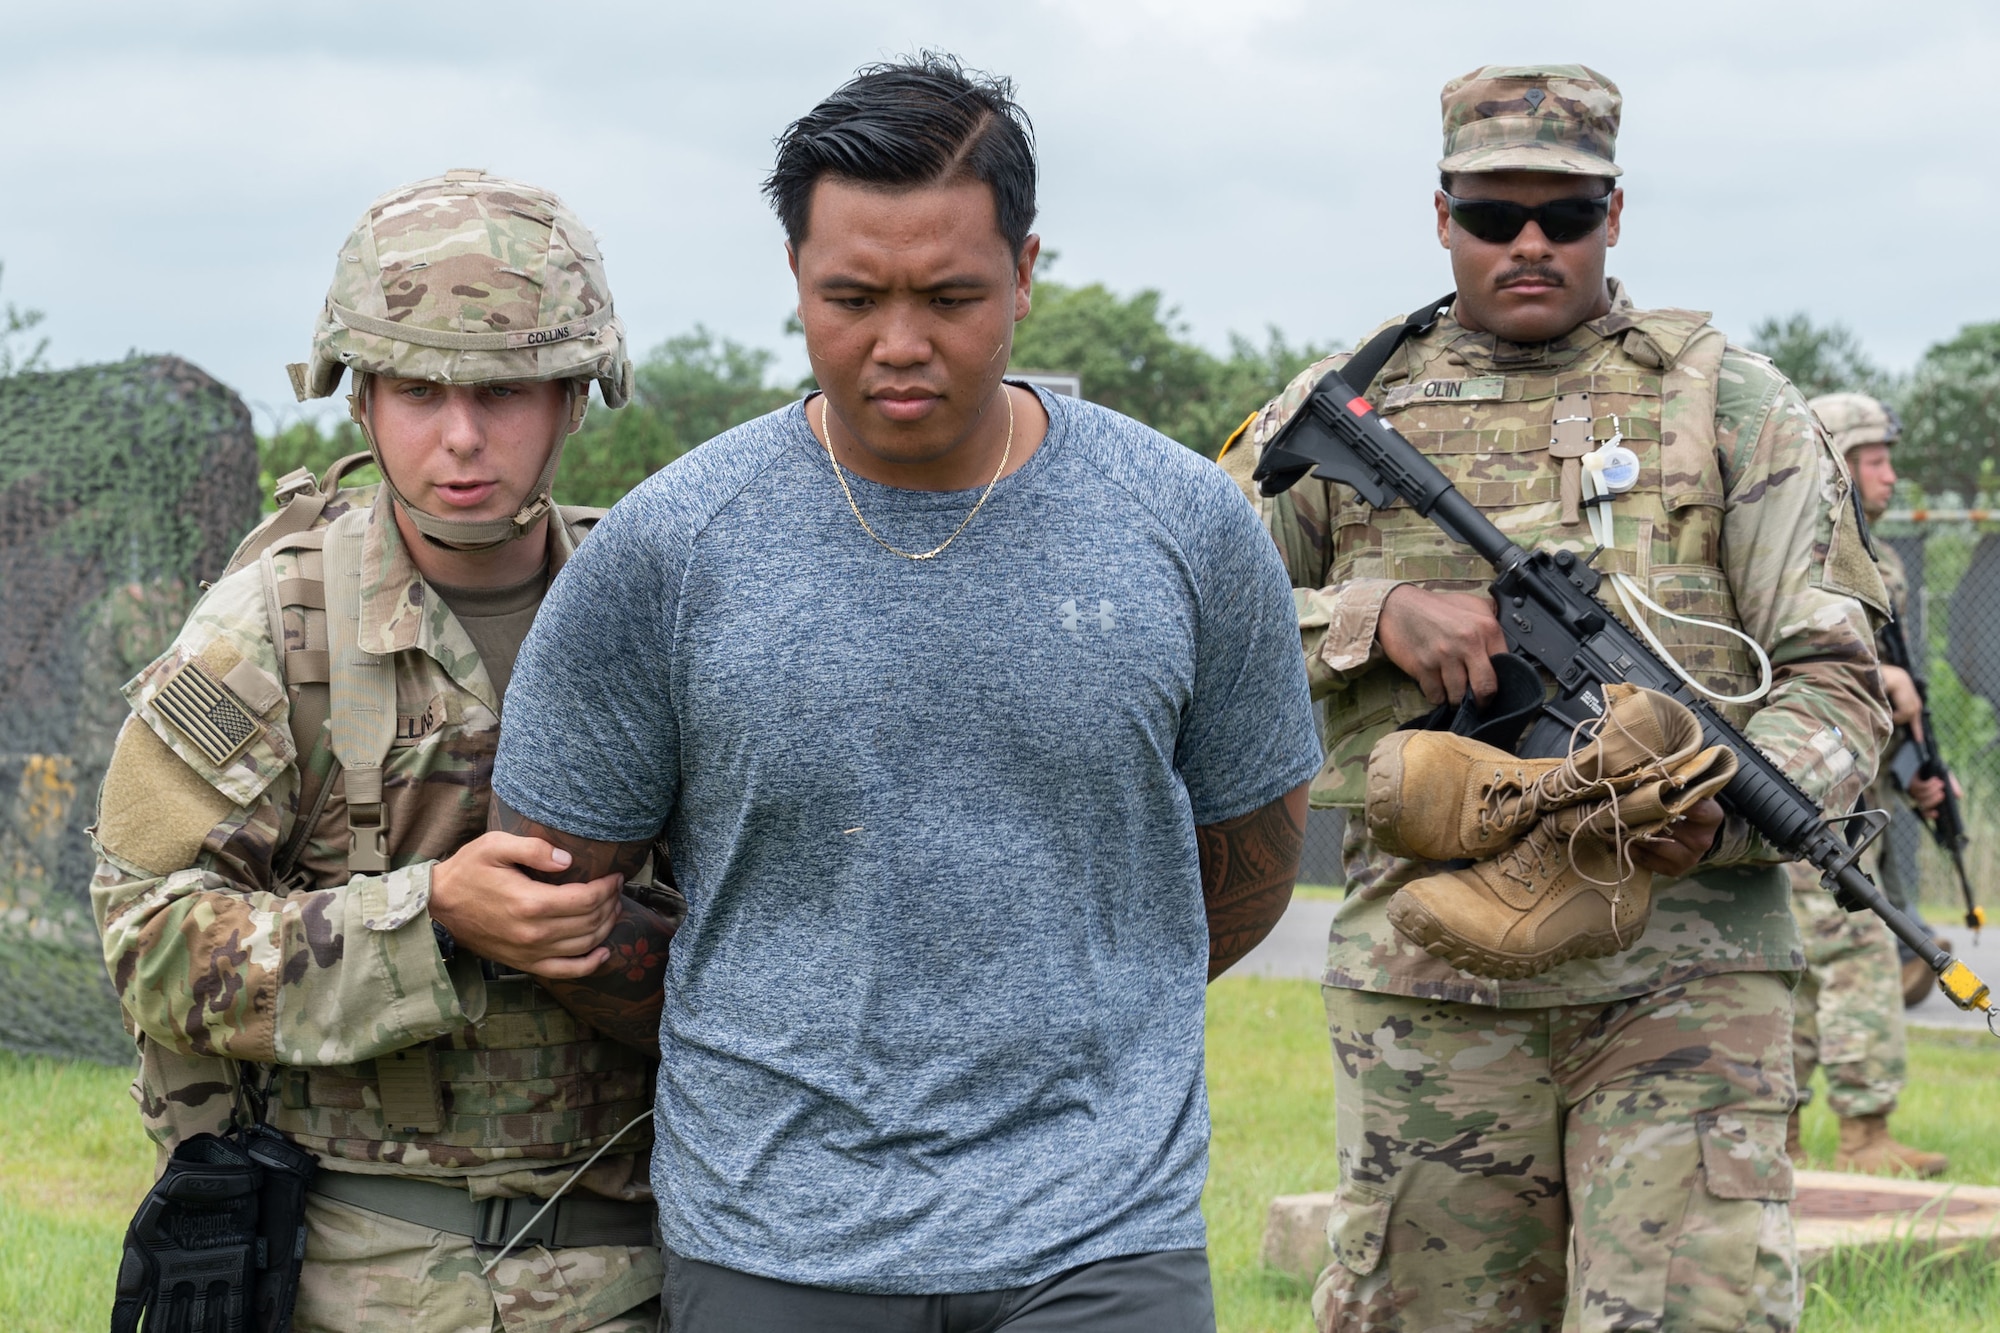 Two Army Soldiers arrest an Air Force Airman in a simulated scenario.